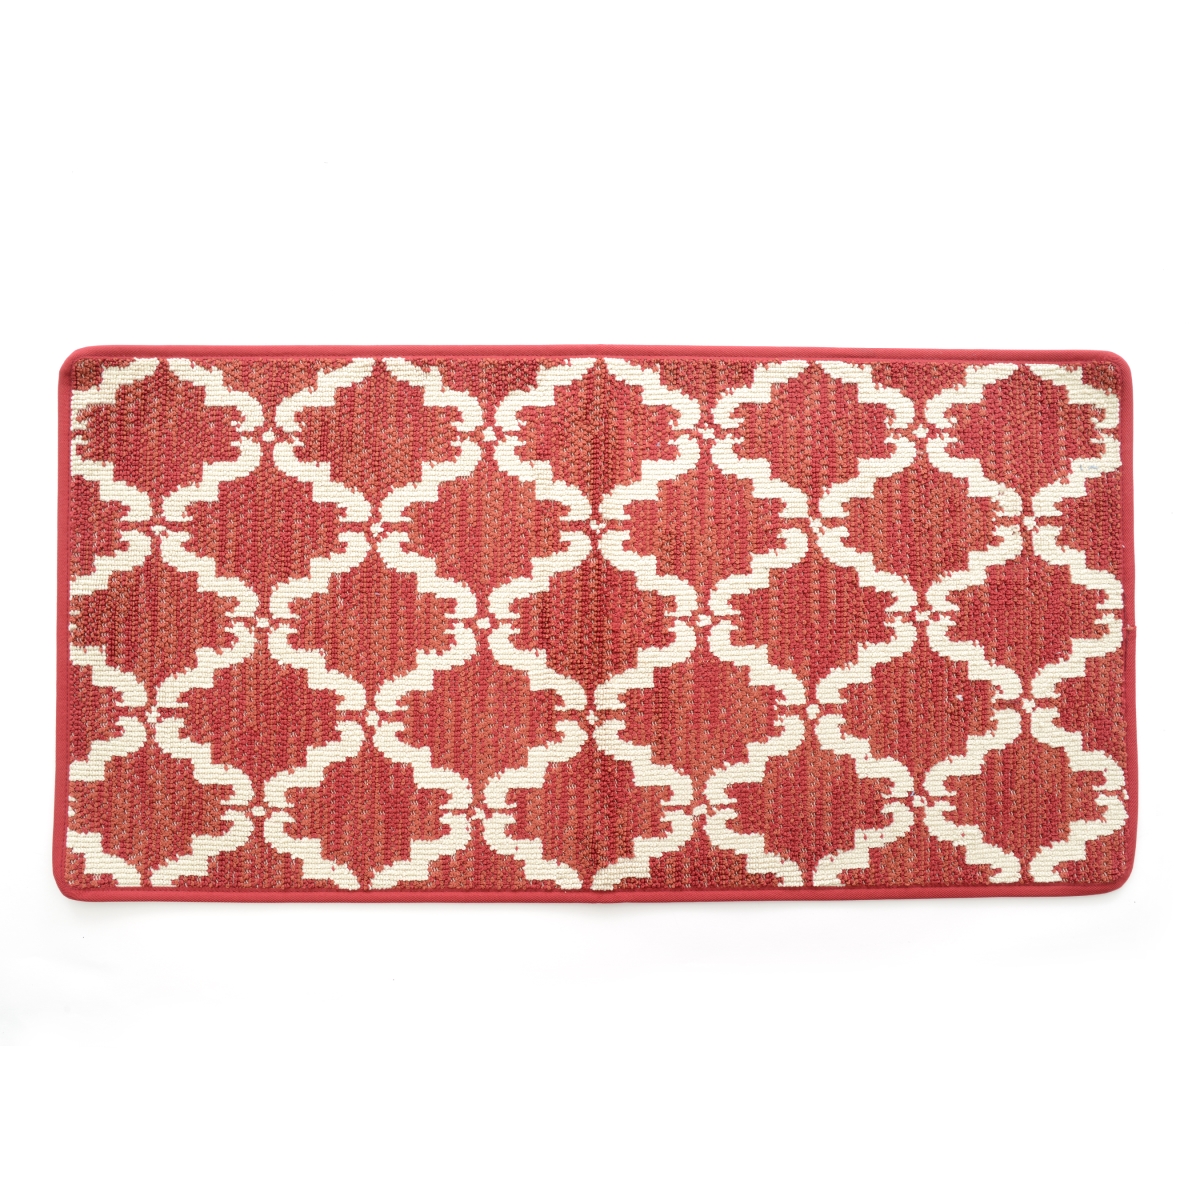 20 X 39 In. Ultra Plush Pacific Knitted Loop Pile Polyester Bath Mat - Red